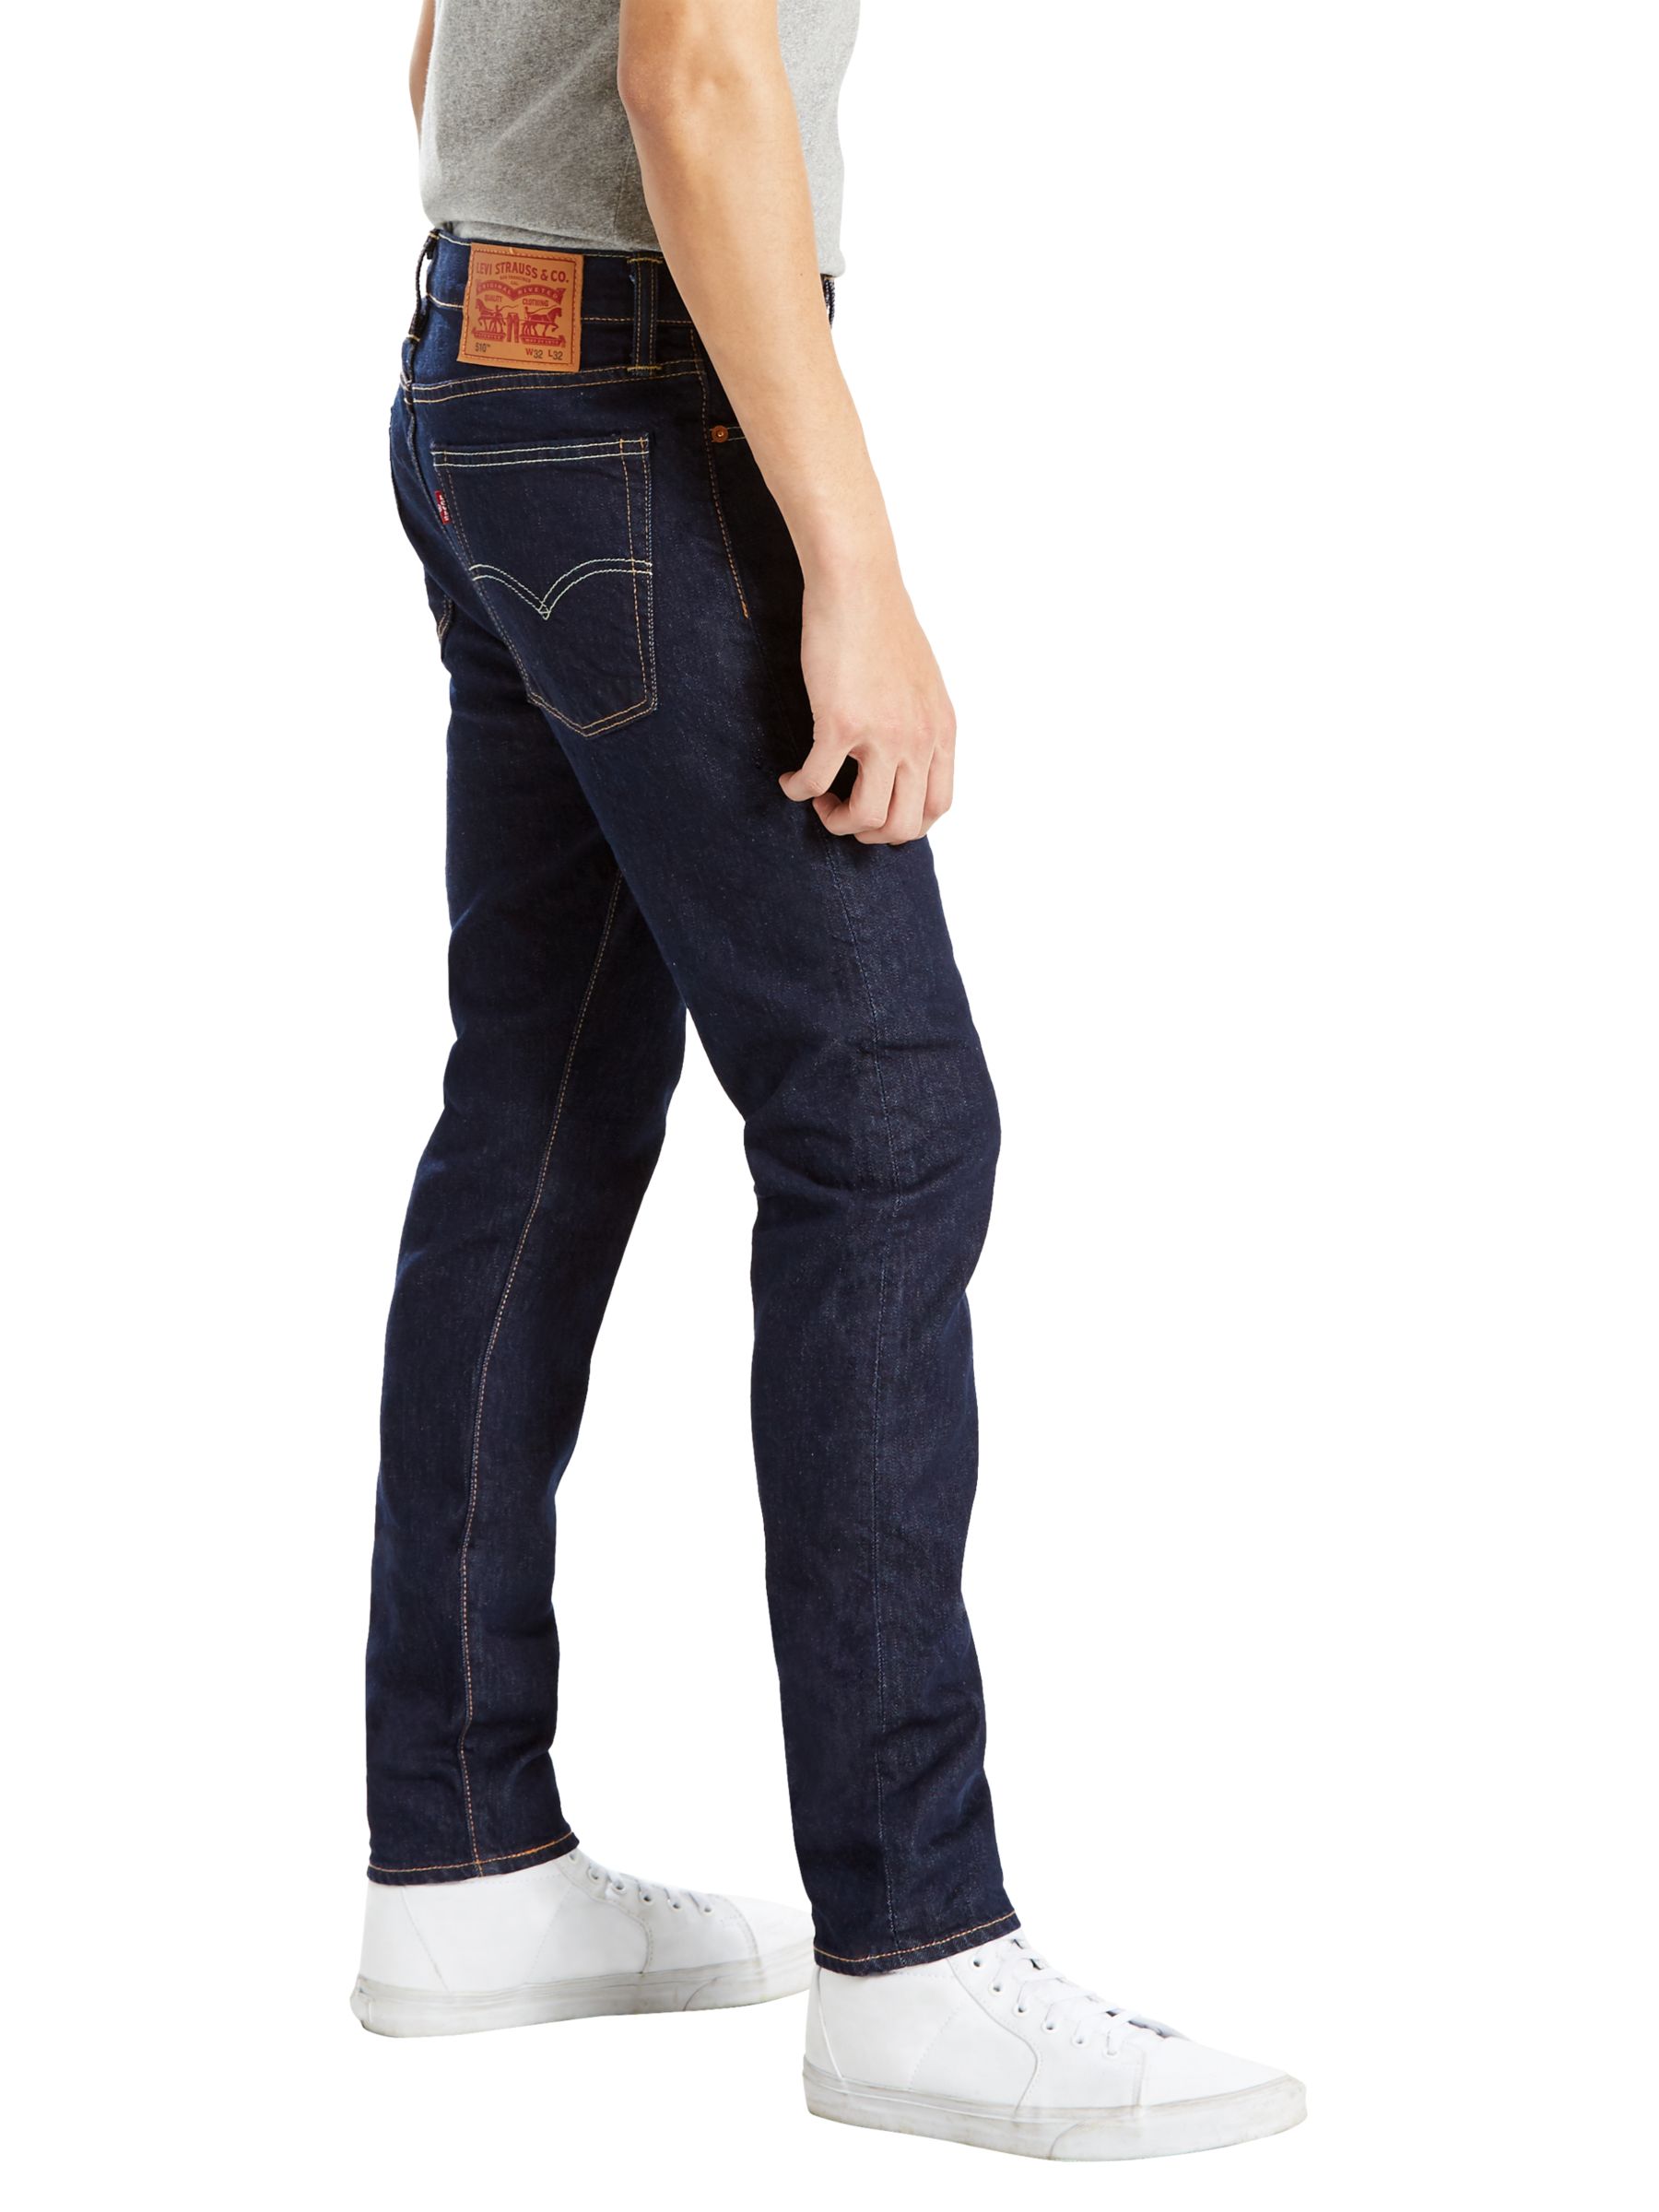 Levi's 510 Skinny Jeans, Chain Rinse at 